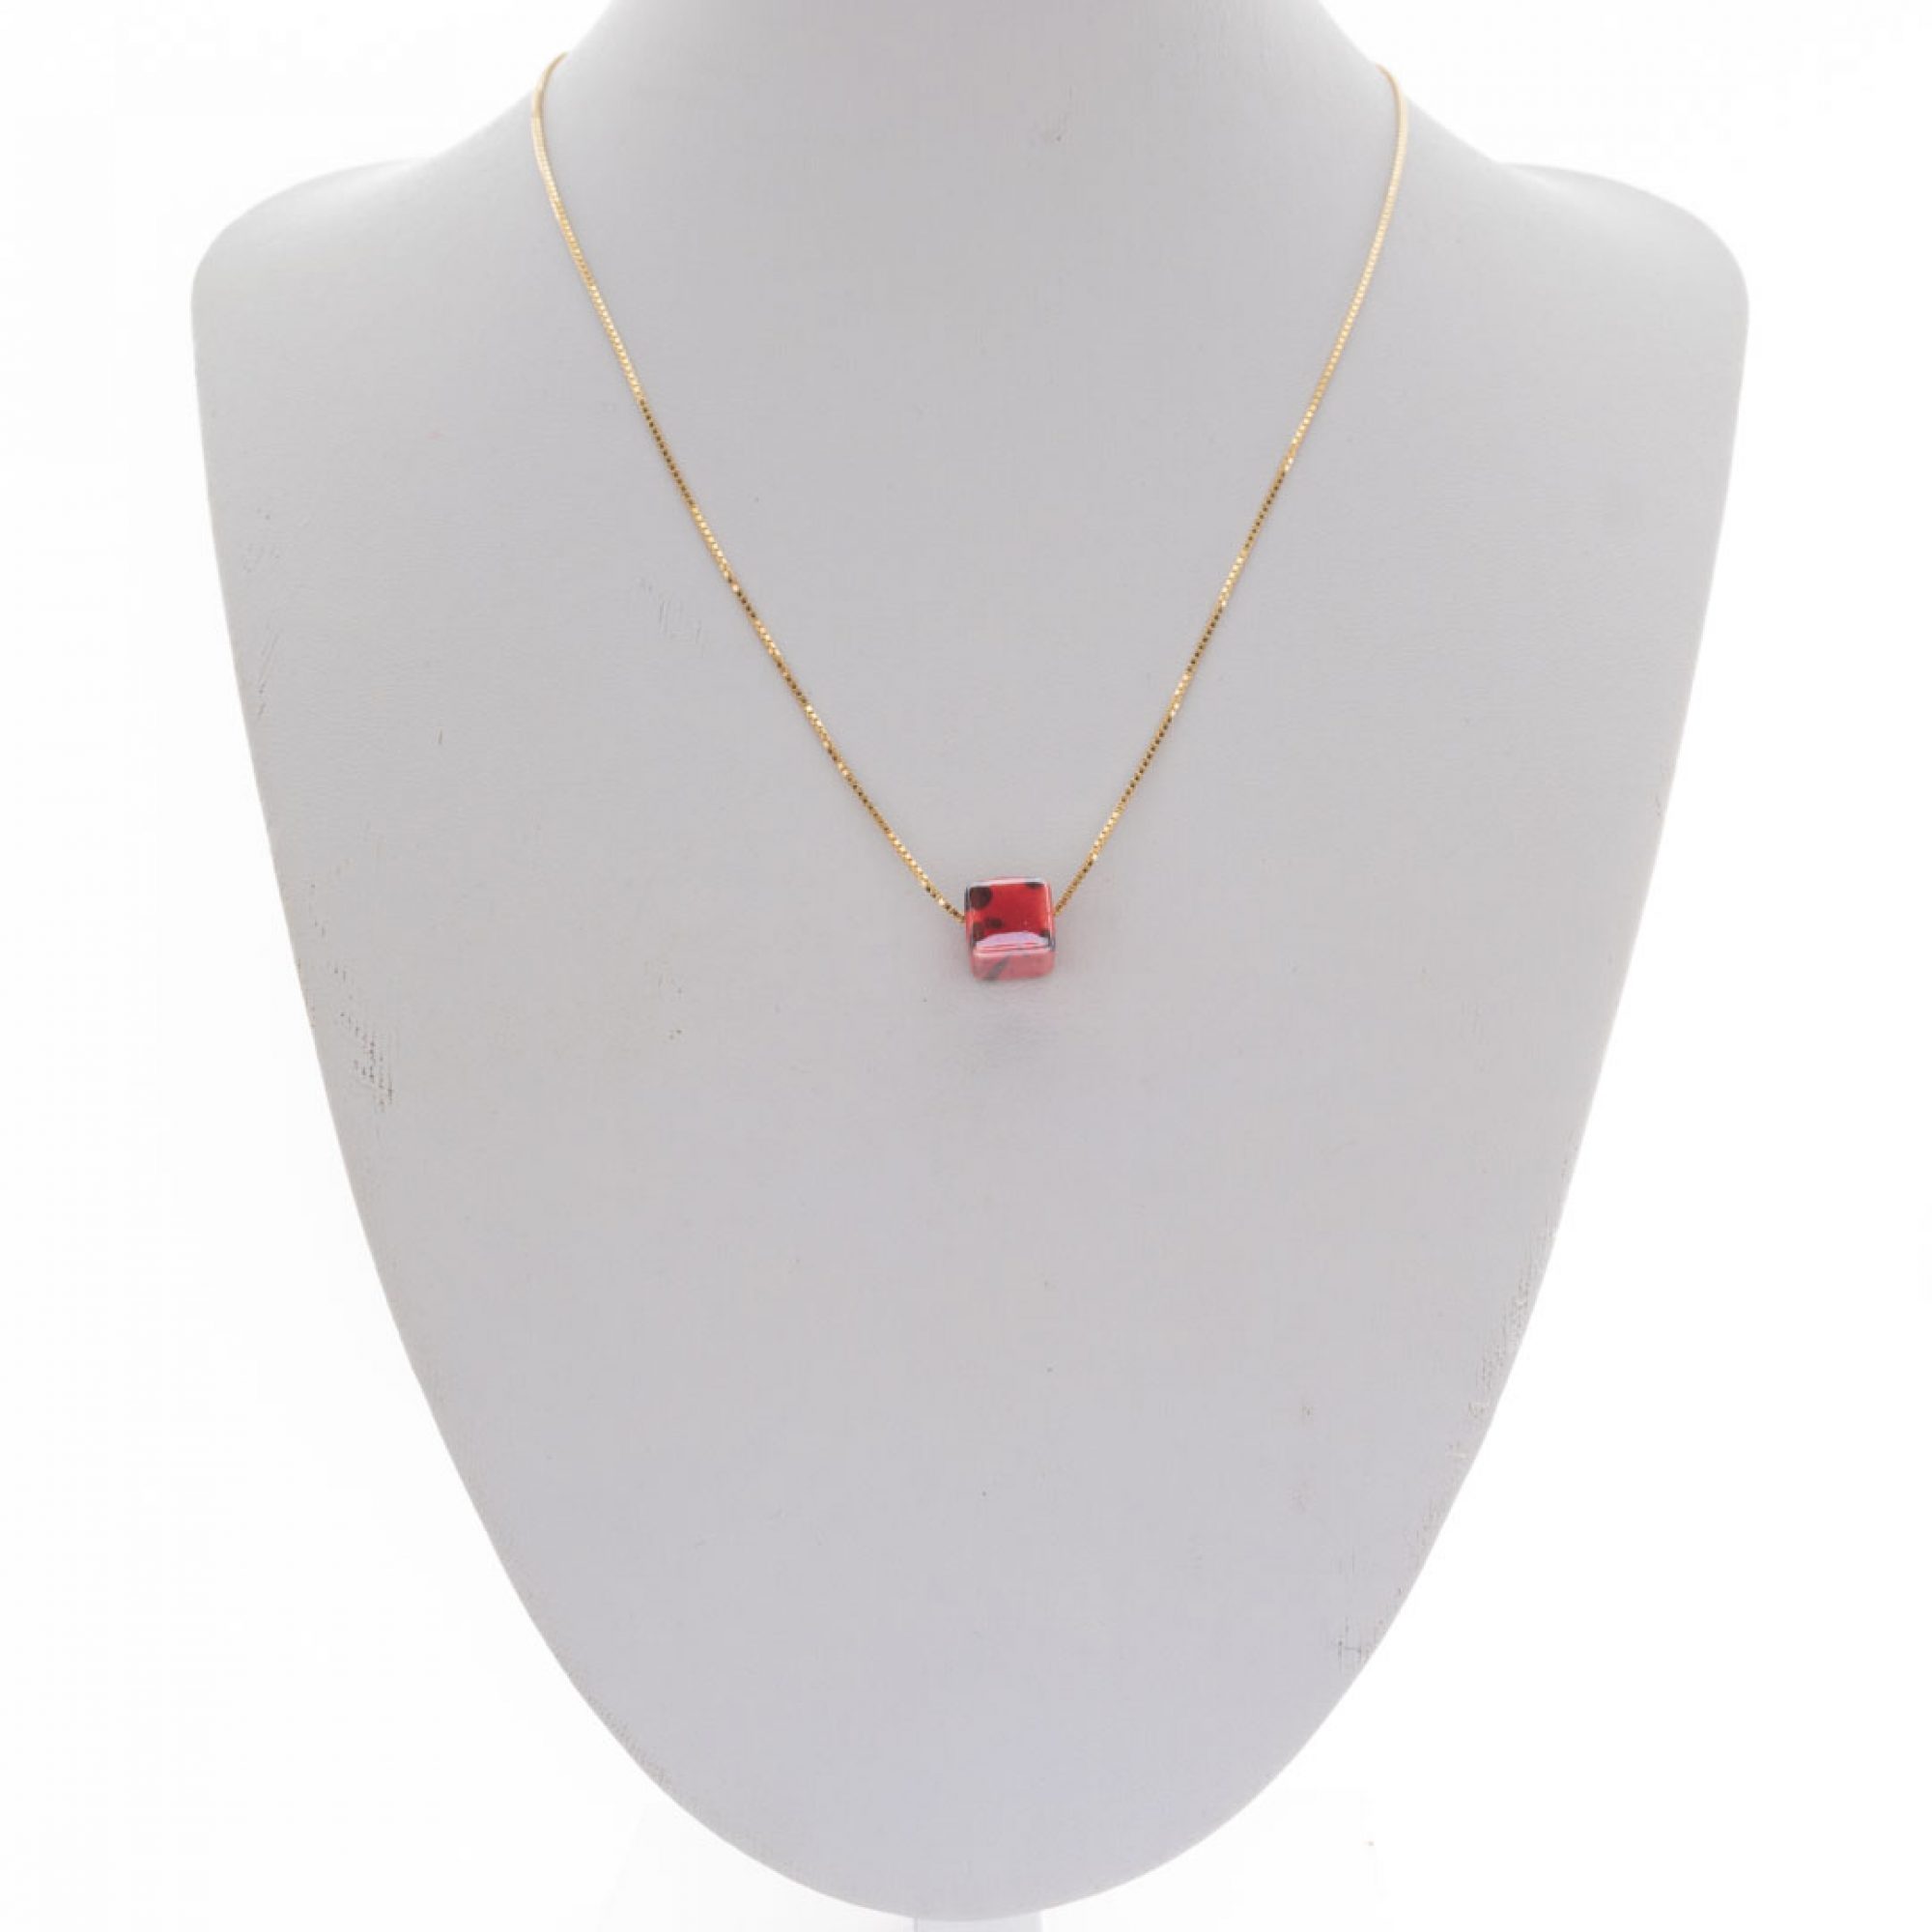 Gold plated red bead necklace